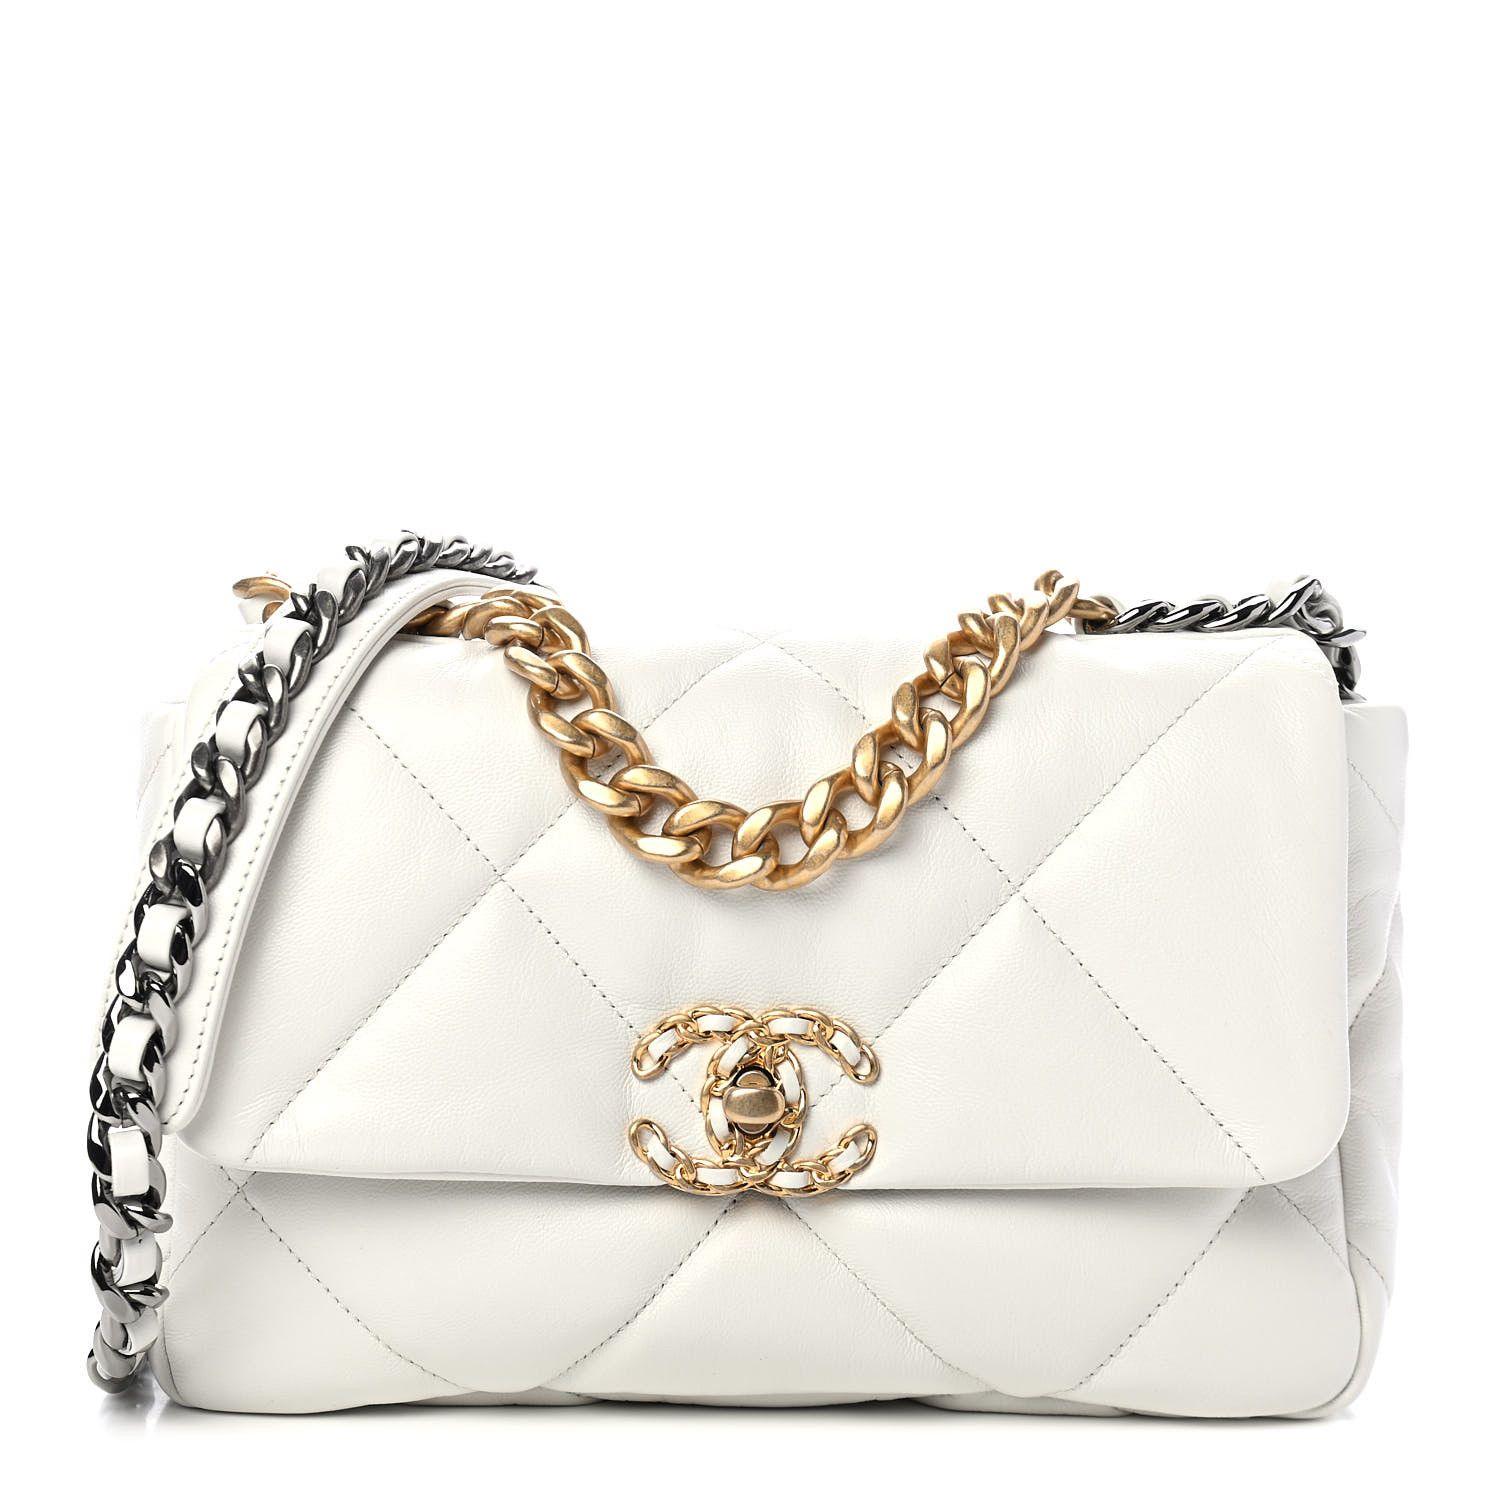 CHANEL

Lambskin Quilted Medium Chanel 19 Flap White | Fashionphile